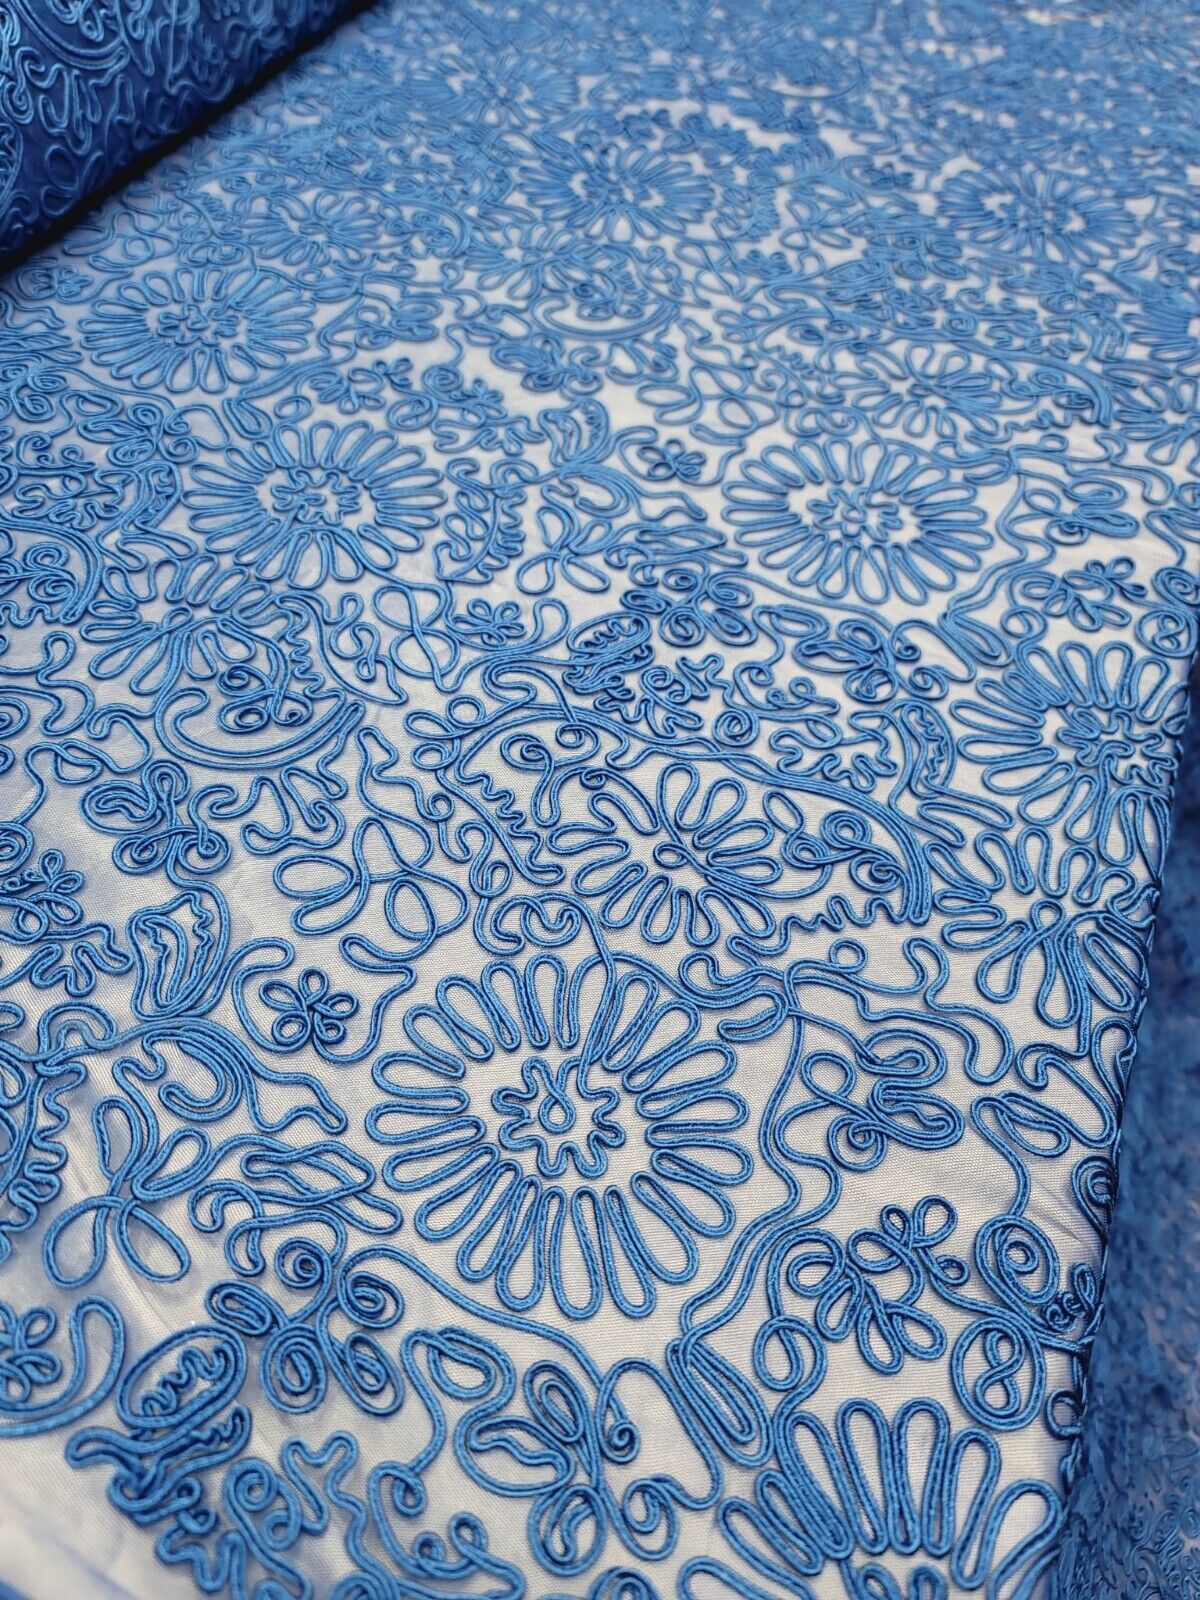 Royal Blue Lace Fabric - 56" Width - Sold by the Yard - Embroidery Cord Floral Flowers